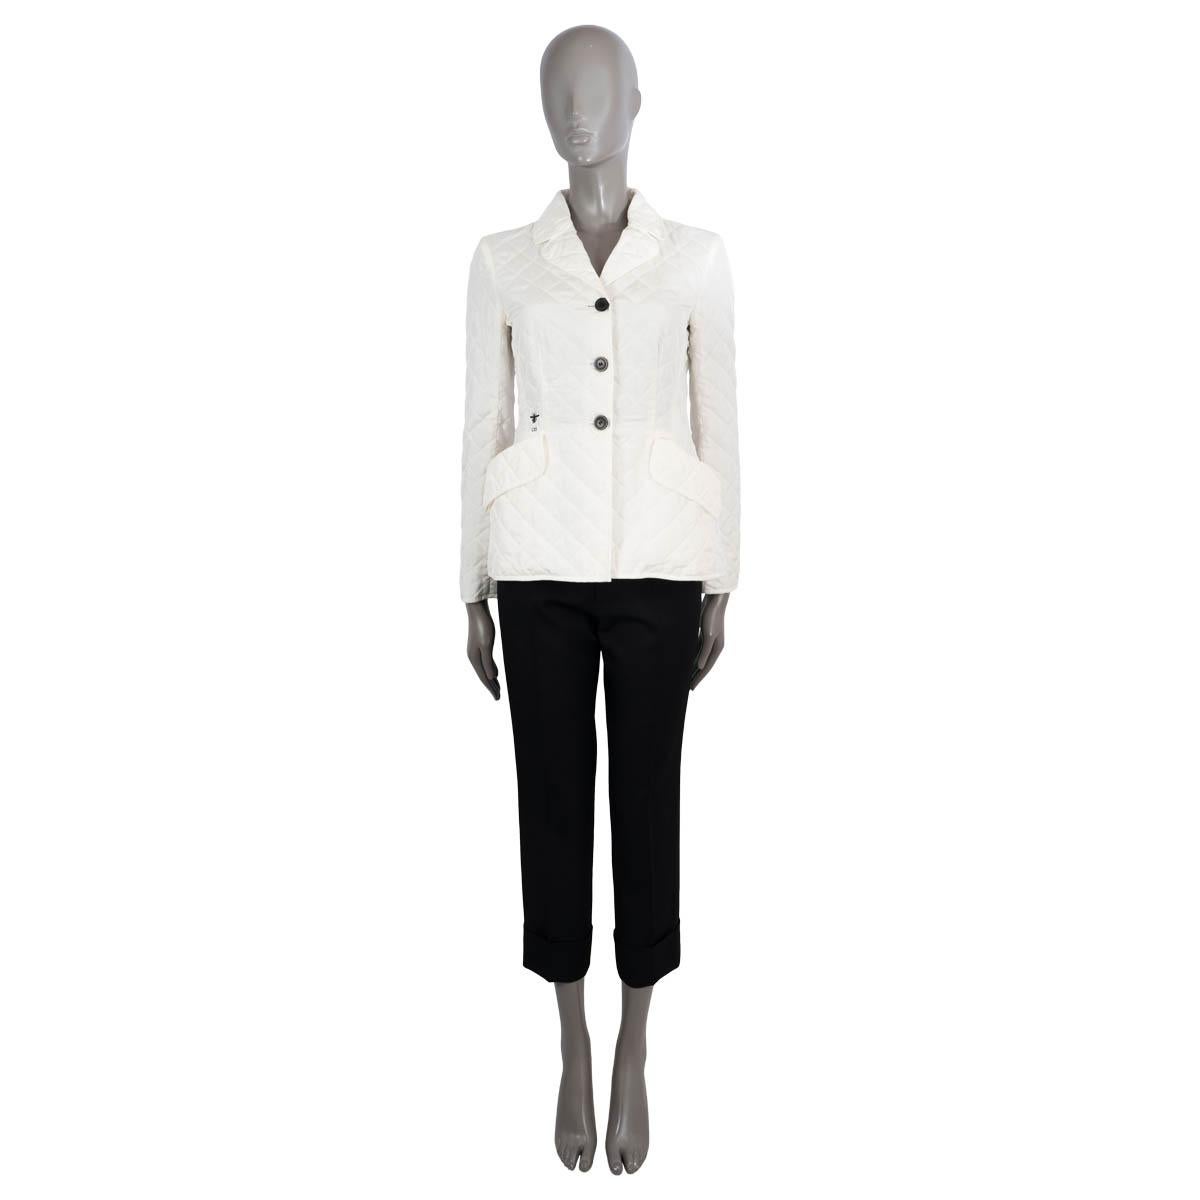 100% authentic Christian Dior quilted blazer in white silk (100%). Features a notch collar, two flap pockets on the front and bee embroidered logo. Opens with three buttons on the front. Unlined with polyester (100%) padding. Has been worn and is in